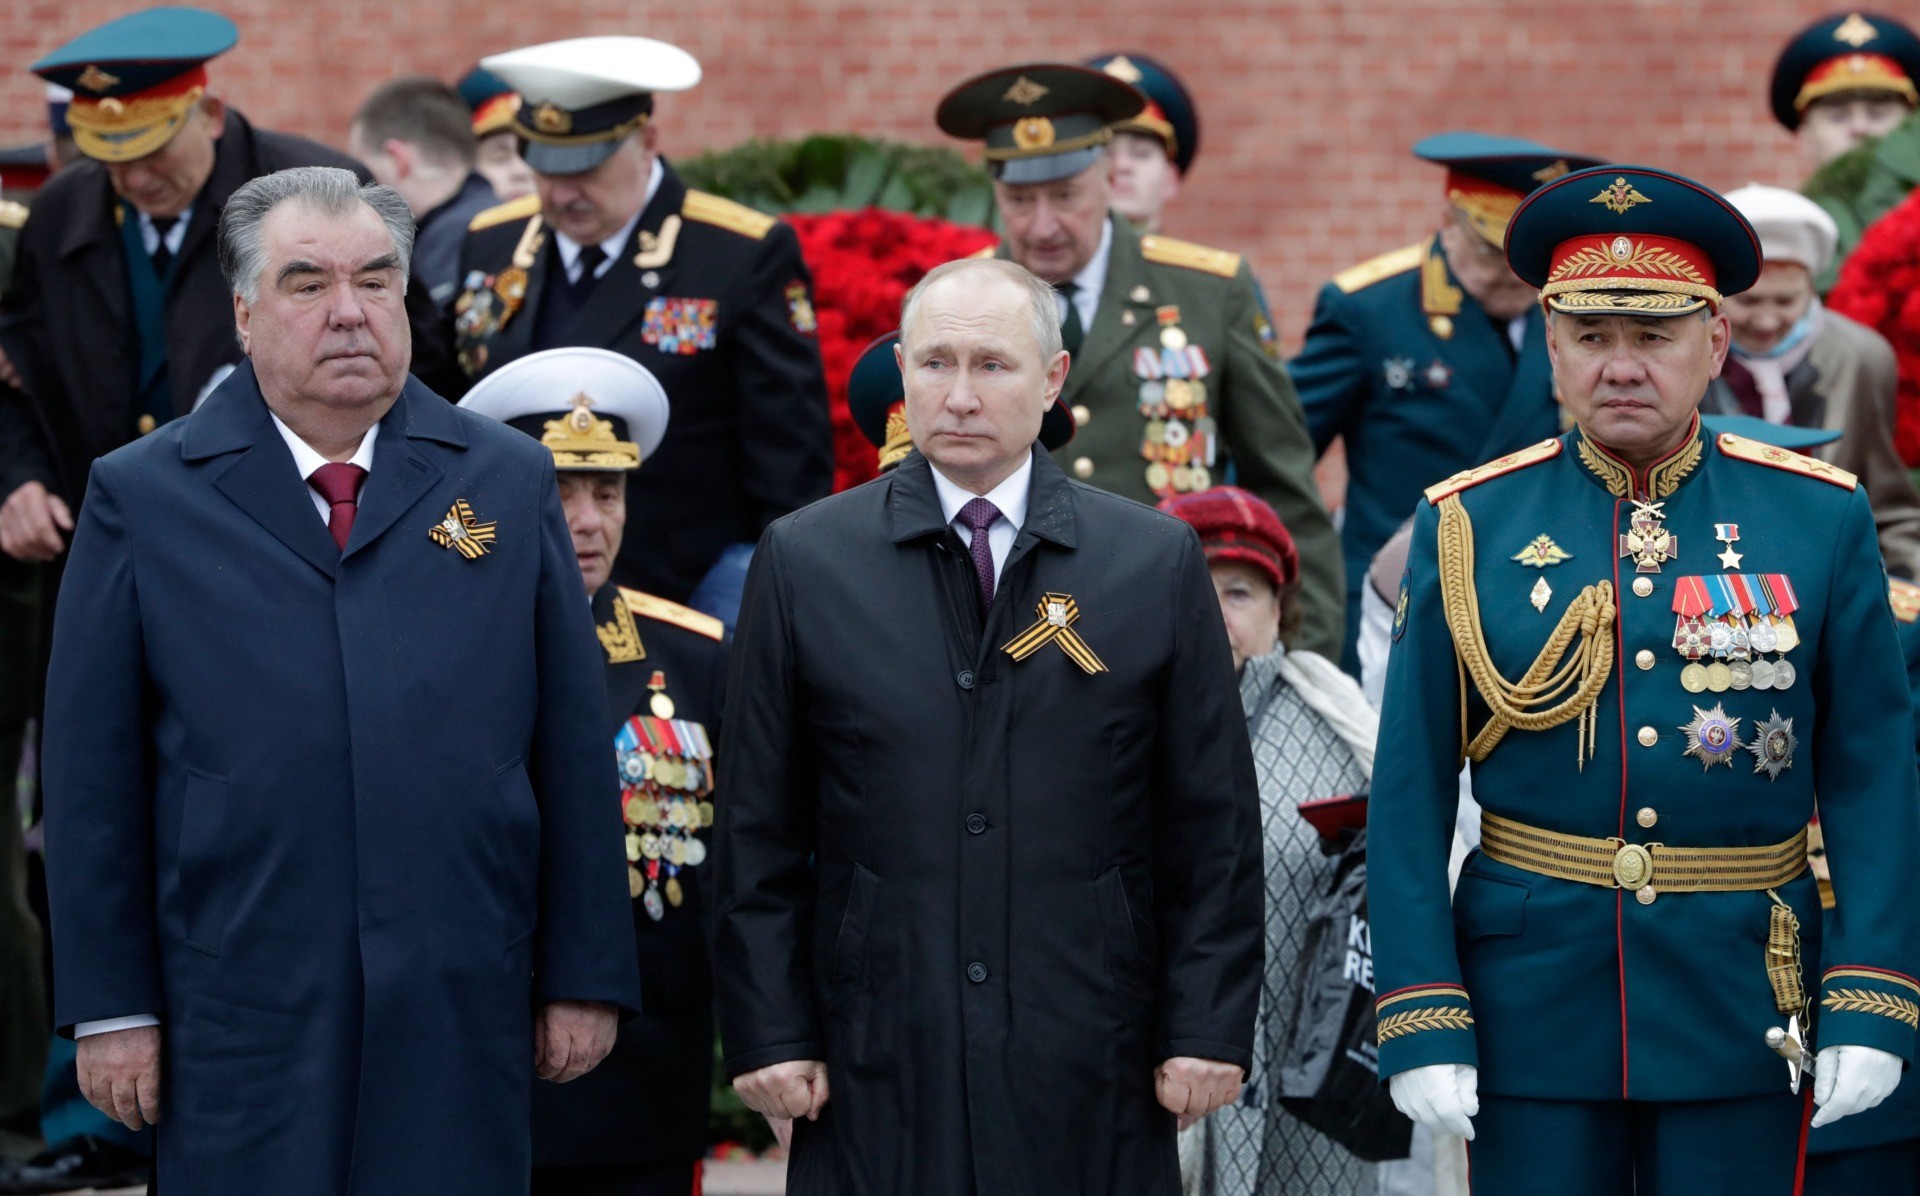 Russian President Vladimir Putin, Tajikistan's President Emomali Rakhmon and Russian Defence Minister Sergei Shoigu attend a flower-laying ceremony at the Tomb of the Unknown Soldier after the Victory Day military parade in Moscow on May 9, 2021. - Russia celebrates the 76th anniversary of the victory over Nazi Germany during World War II. (Photo by Mikhail METZEL / SPUTNIK / AFP) (Photo by MIKHAIL METZEL/SPUTNIK/AFP via Getty Images)